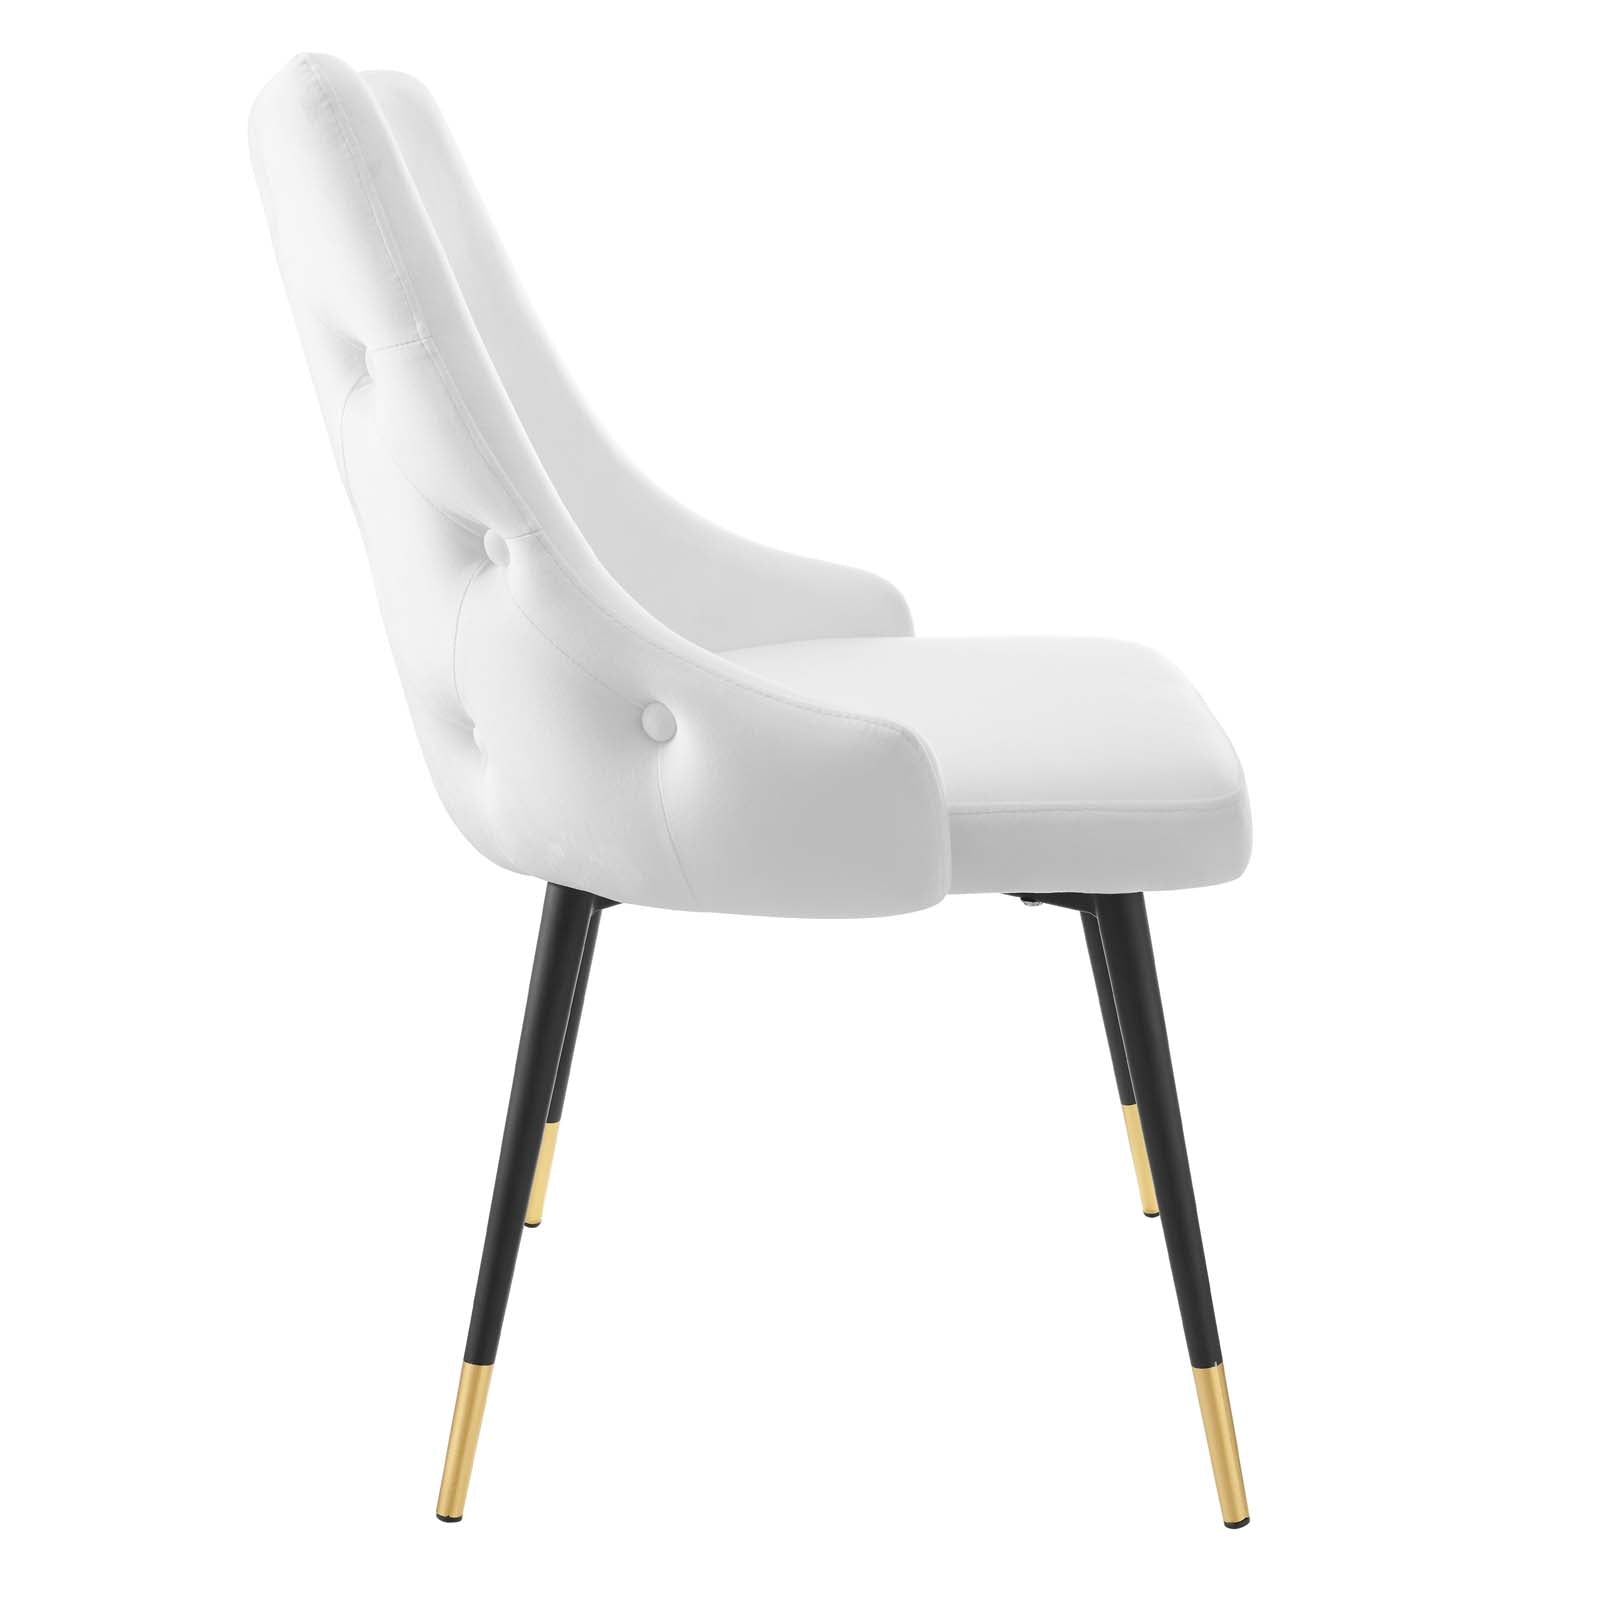 Modway Dining Chairs - Adorn Tufted Performance Velvet Dining Side Chair White